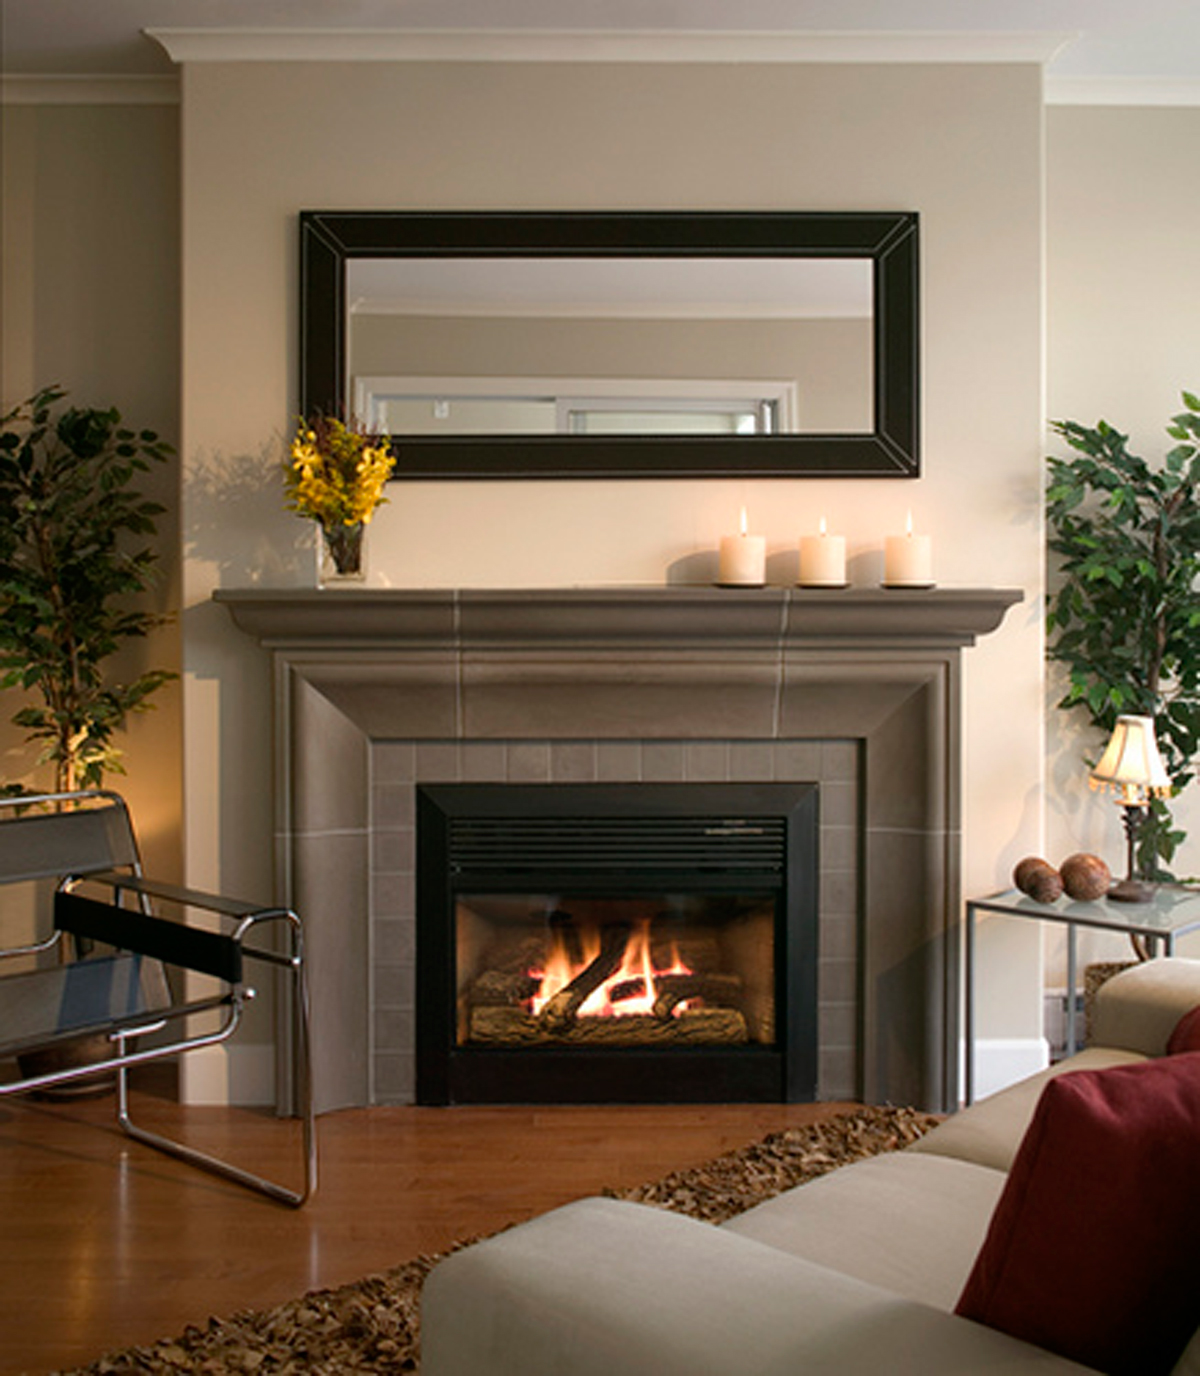 Wood Burning Stoves vs. Gas Fireplaces: Which is Best?